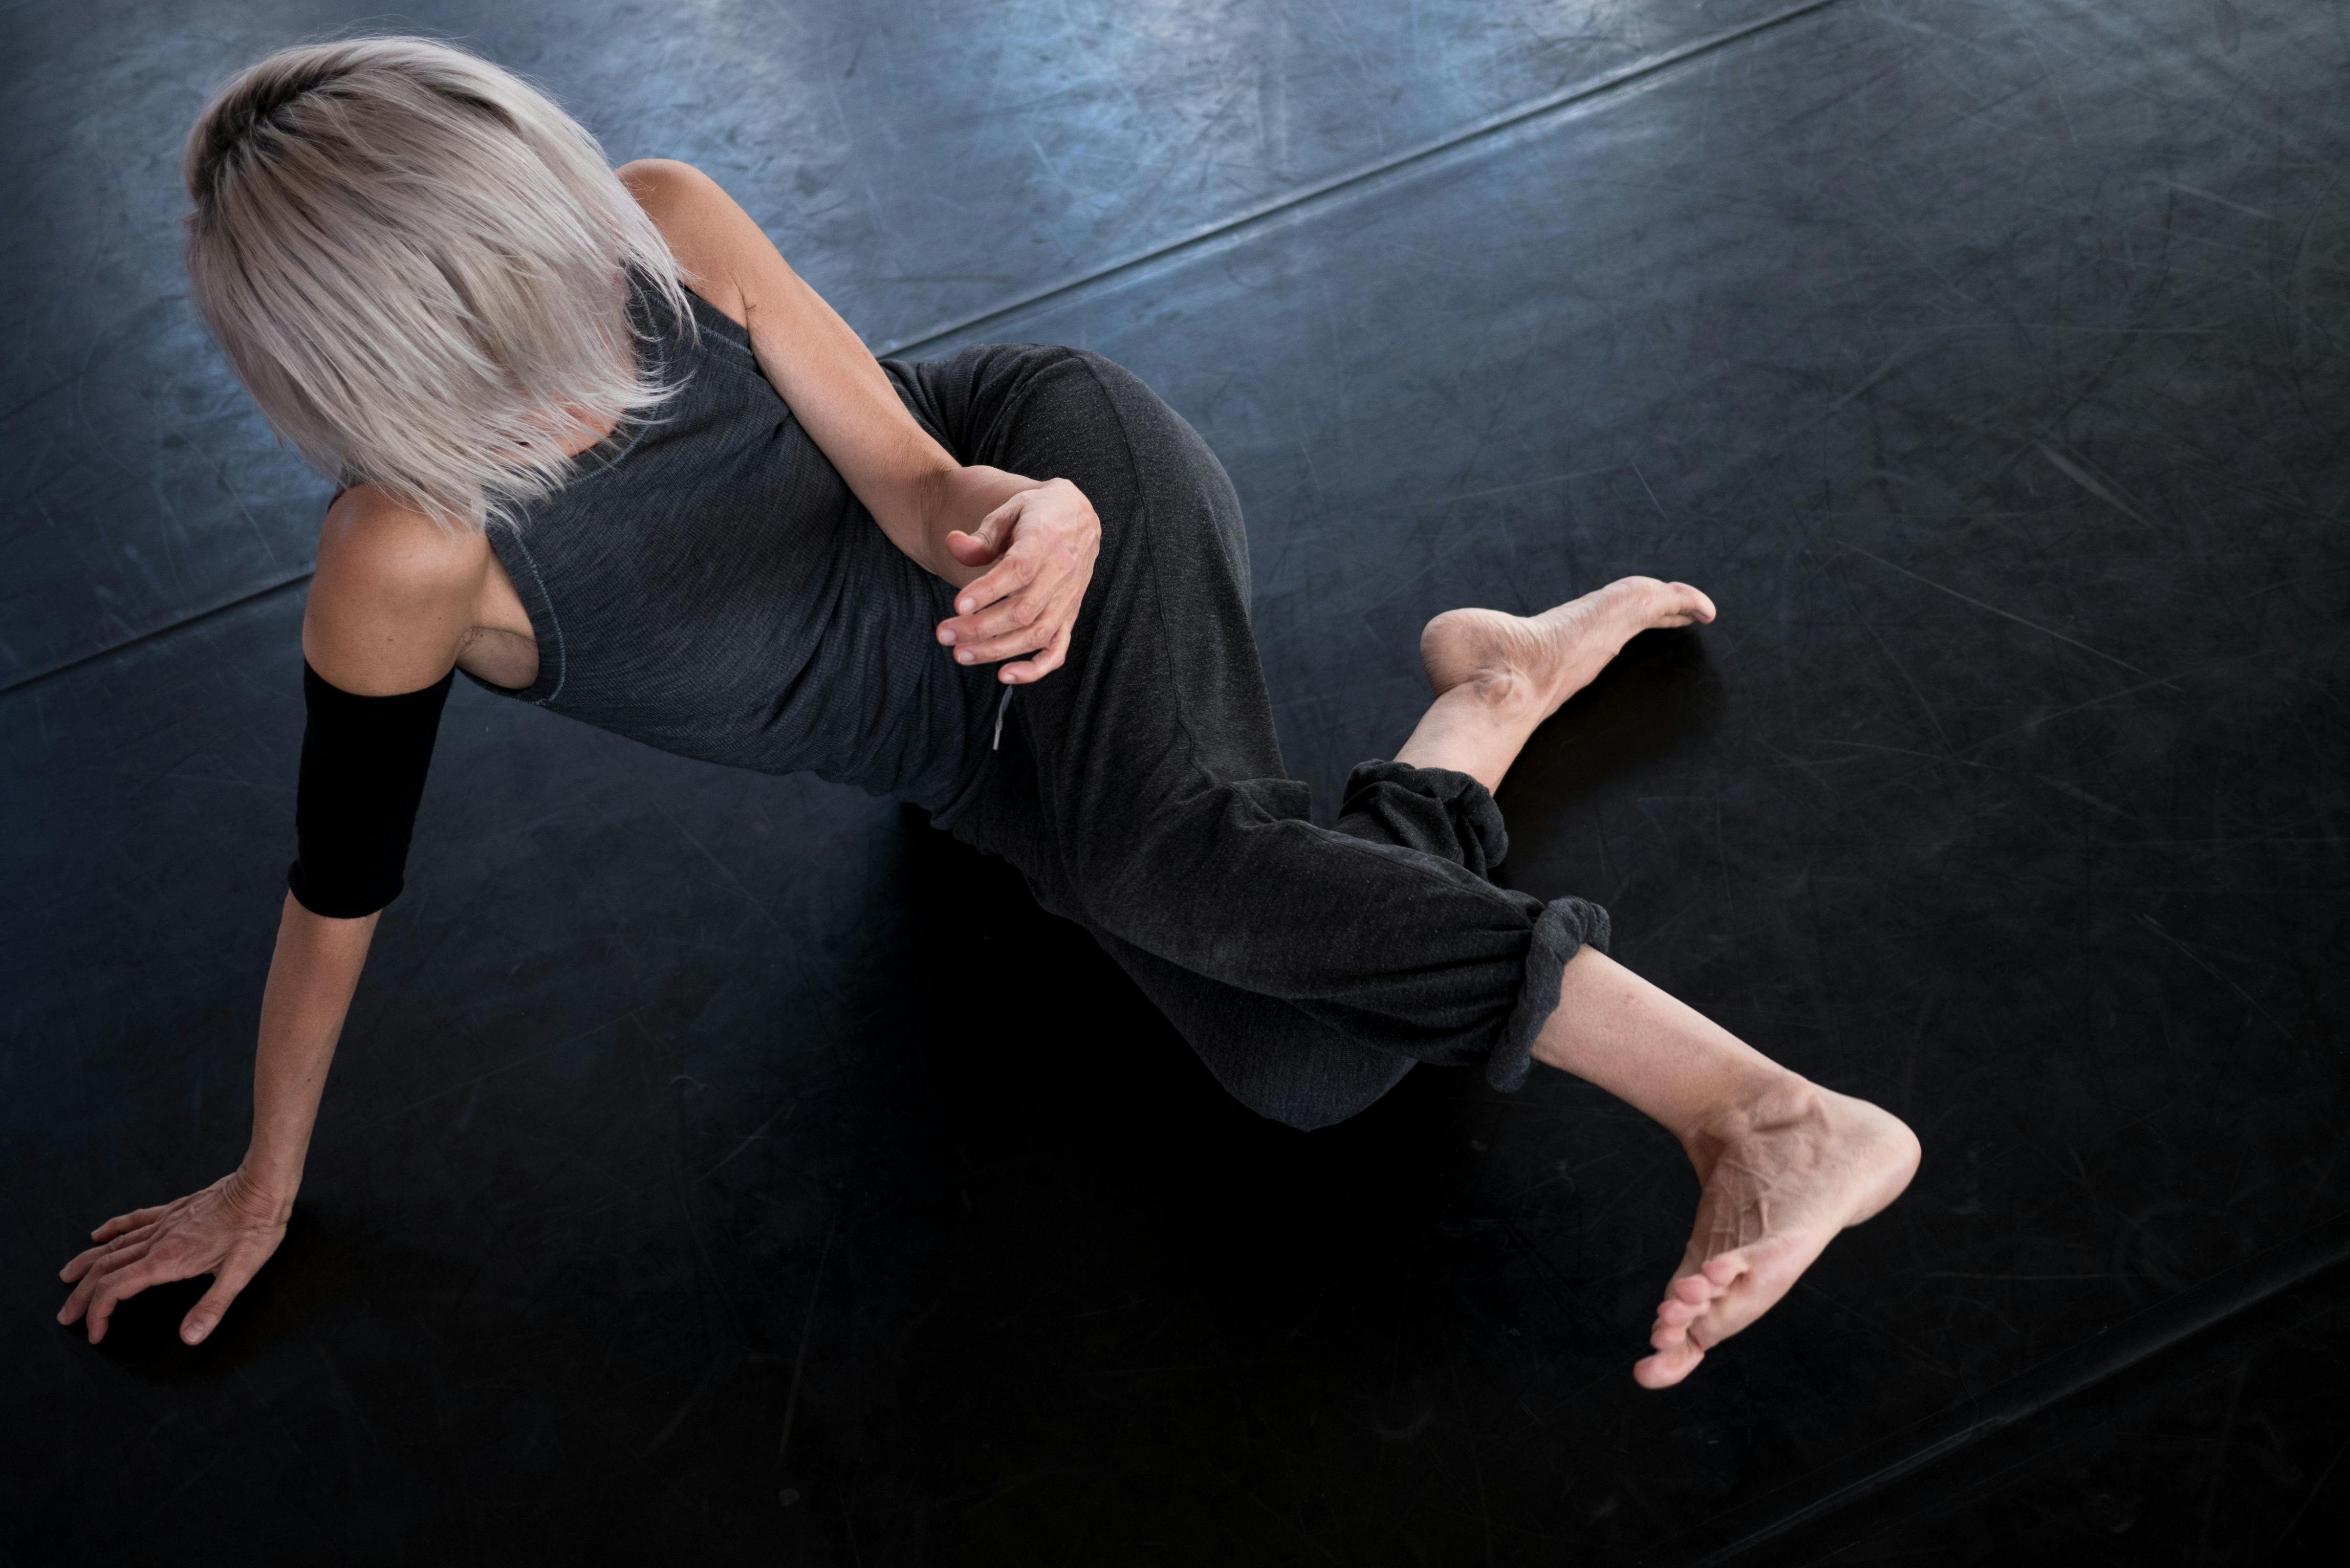 Paola Bianchi, dressed in black, in torsion on the floor. She lifts part of her body, supporting her weight on her right arm. Her shoulder-length, very light hair covers her face.